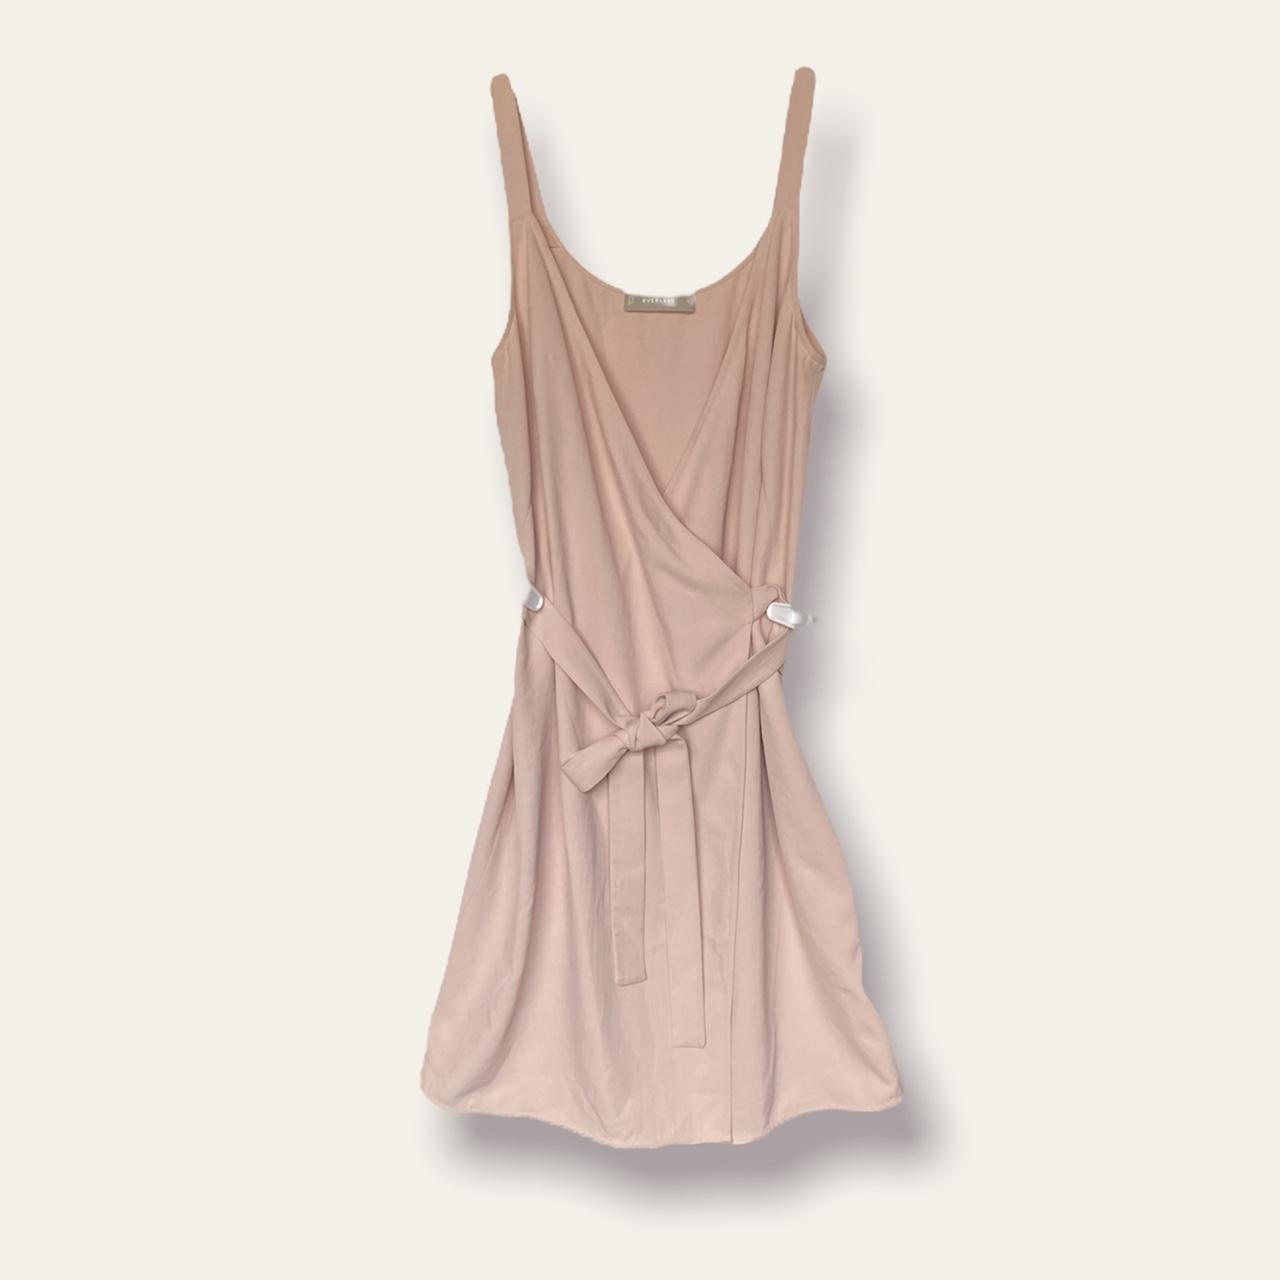 Pale pink wrap dress from Everlane ...